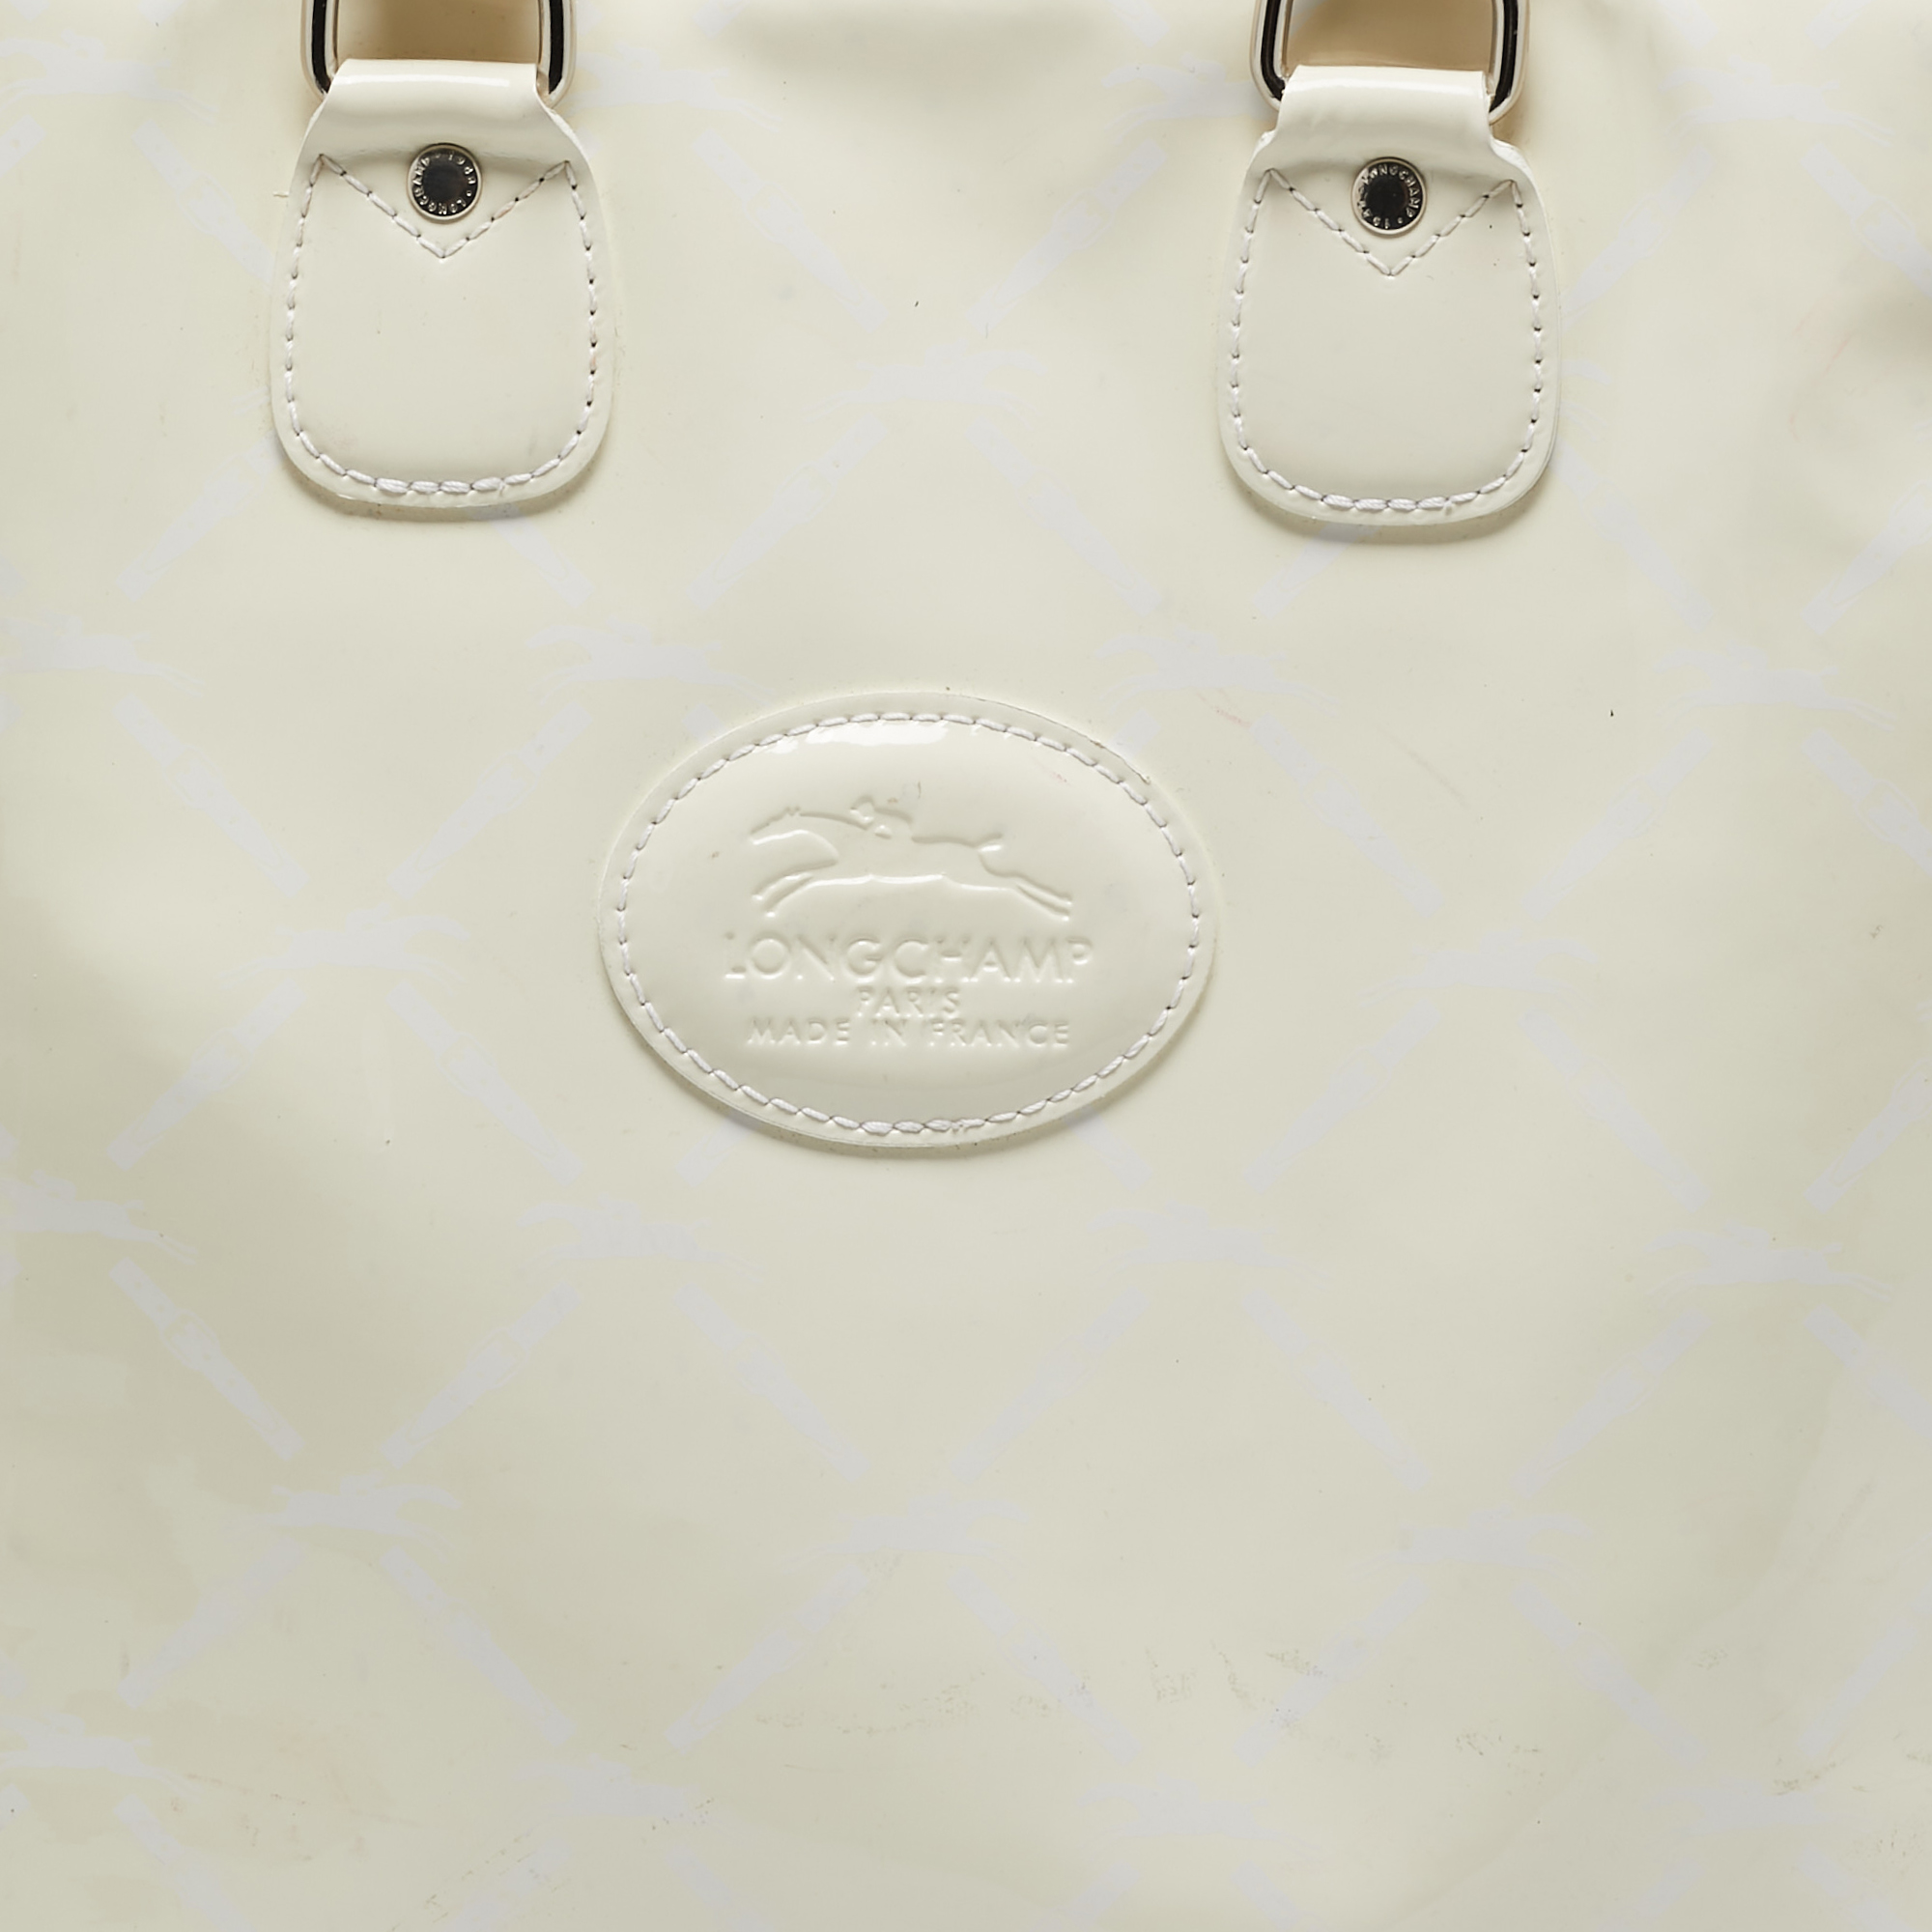 Longchamp Cream/Silver Quilted Print Patent Leather Vertical Tote